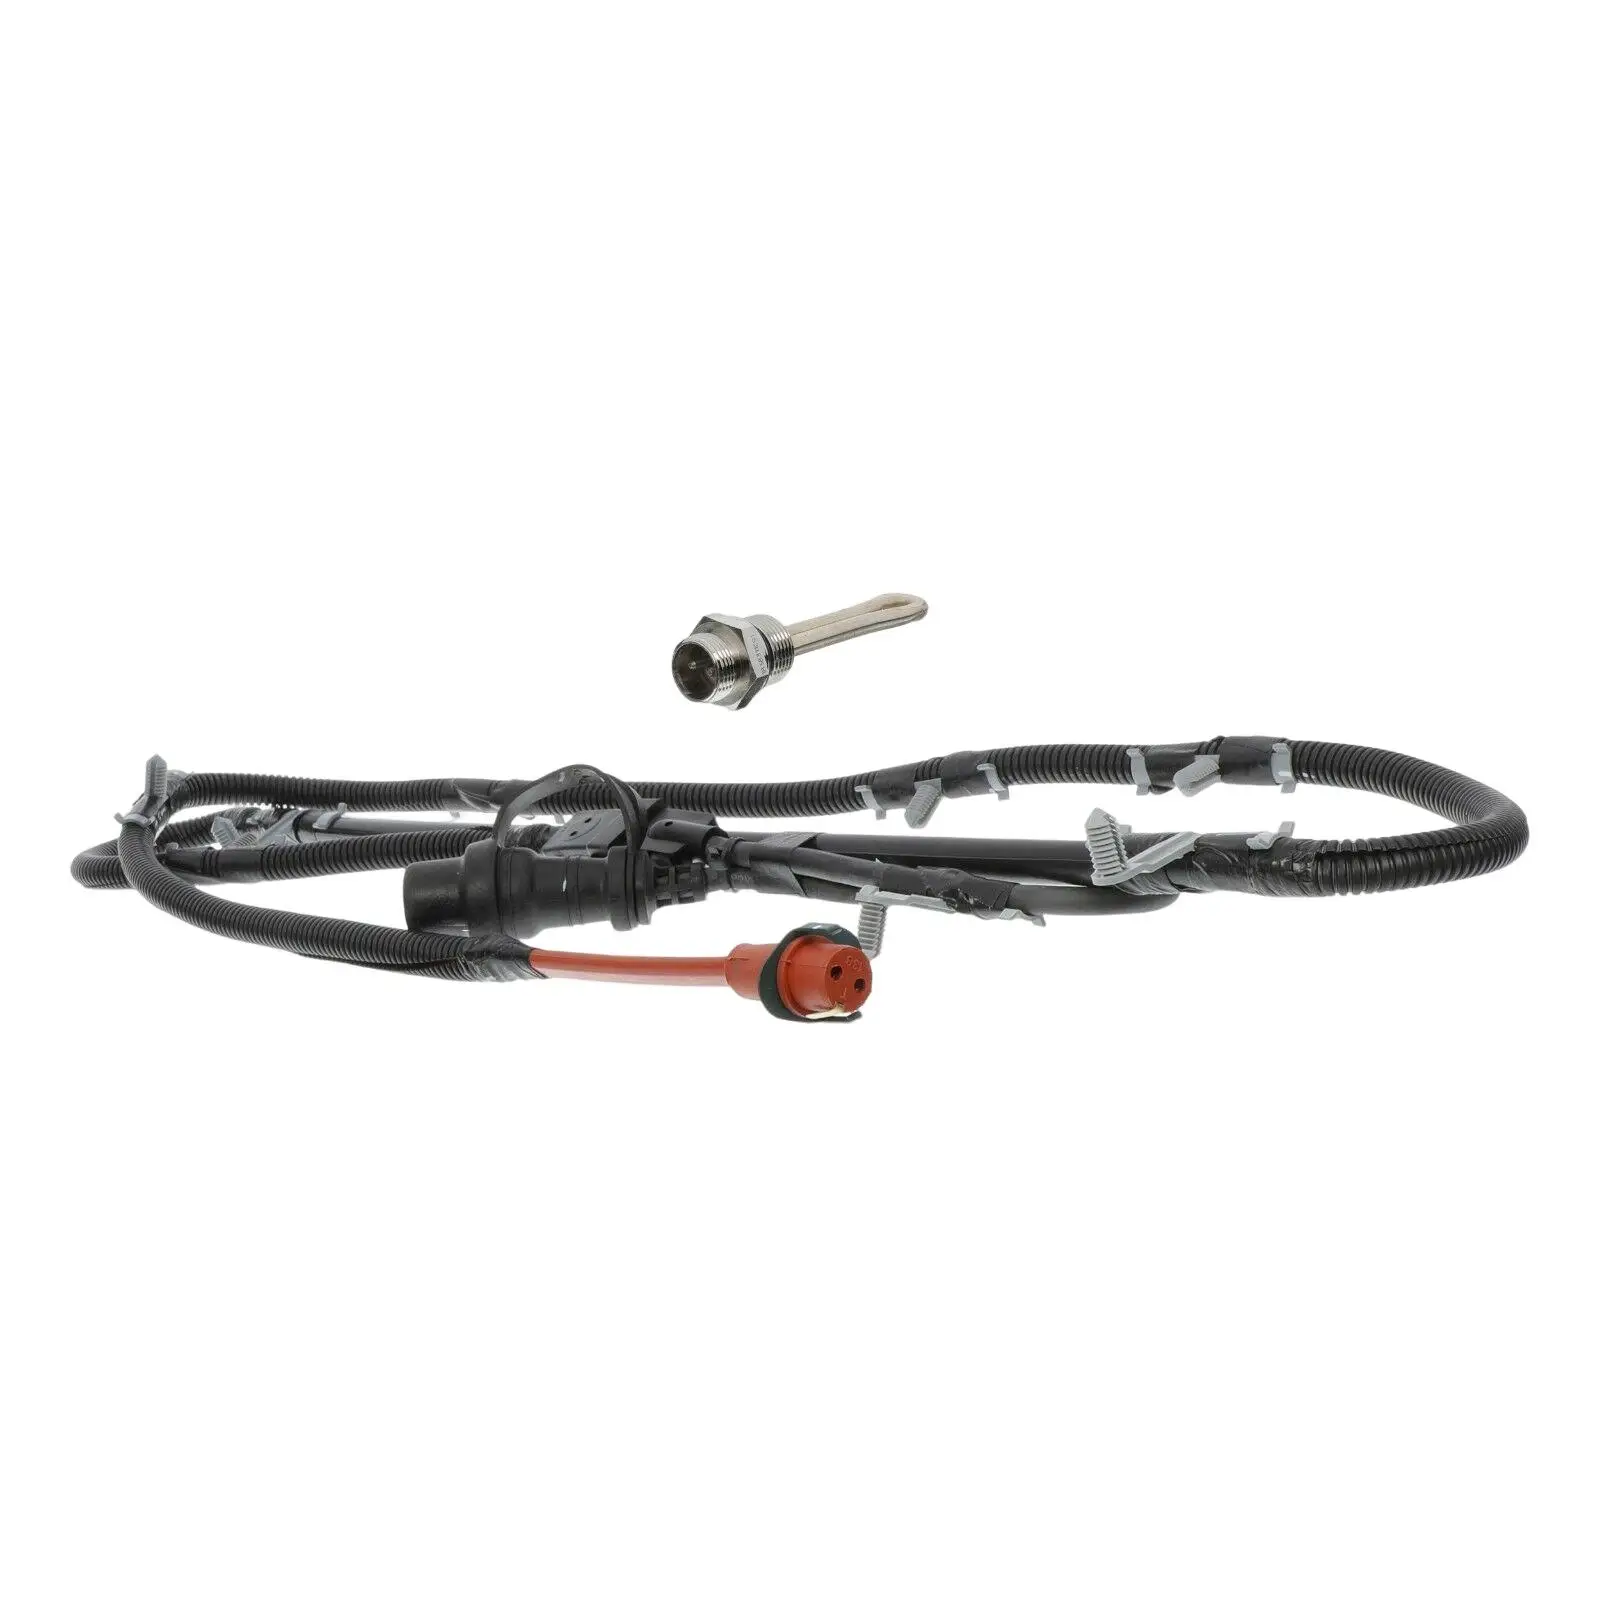 Engine Block Heater & Plug Cord Cable Durable Professional for Ford